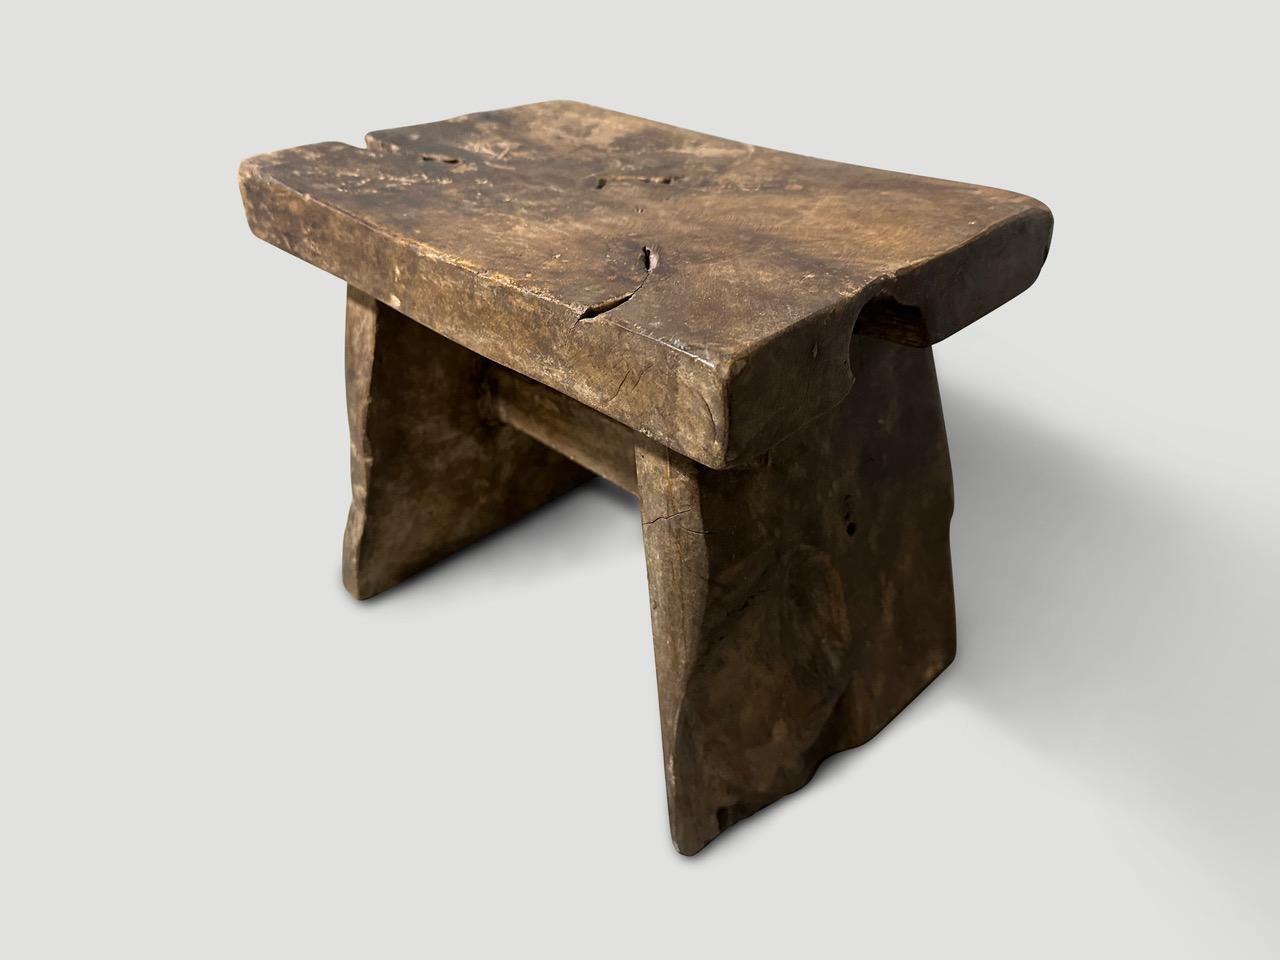 Antique hand made side table or stool. Celebrating the cracks and crevices and all the other marks that time and loving use have left behind. Circa 1950

This side table or stool was hand made in the spirit of Wabi-Sabi, a Japanese philosophy that